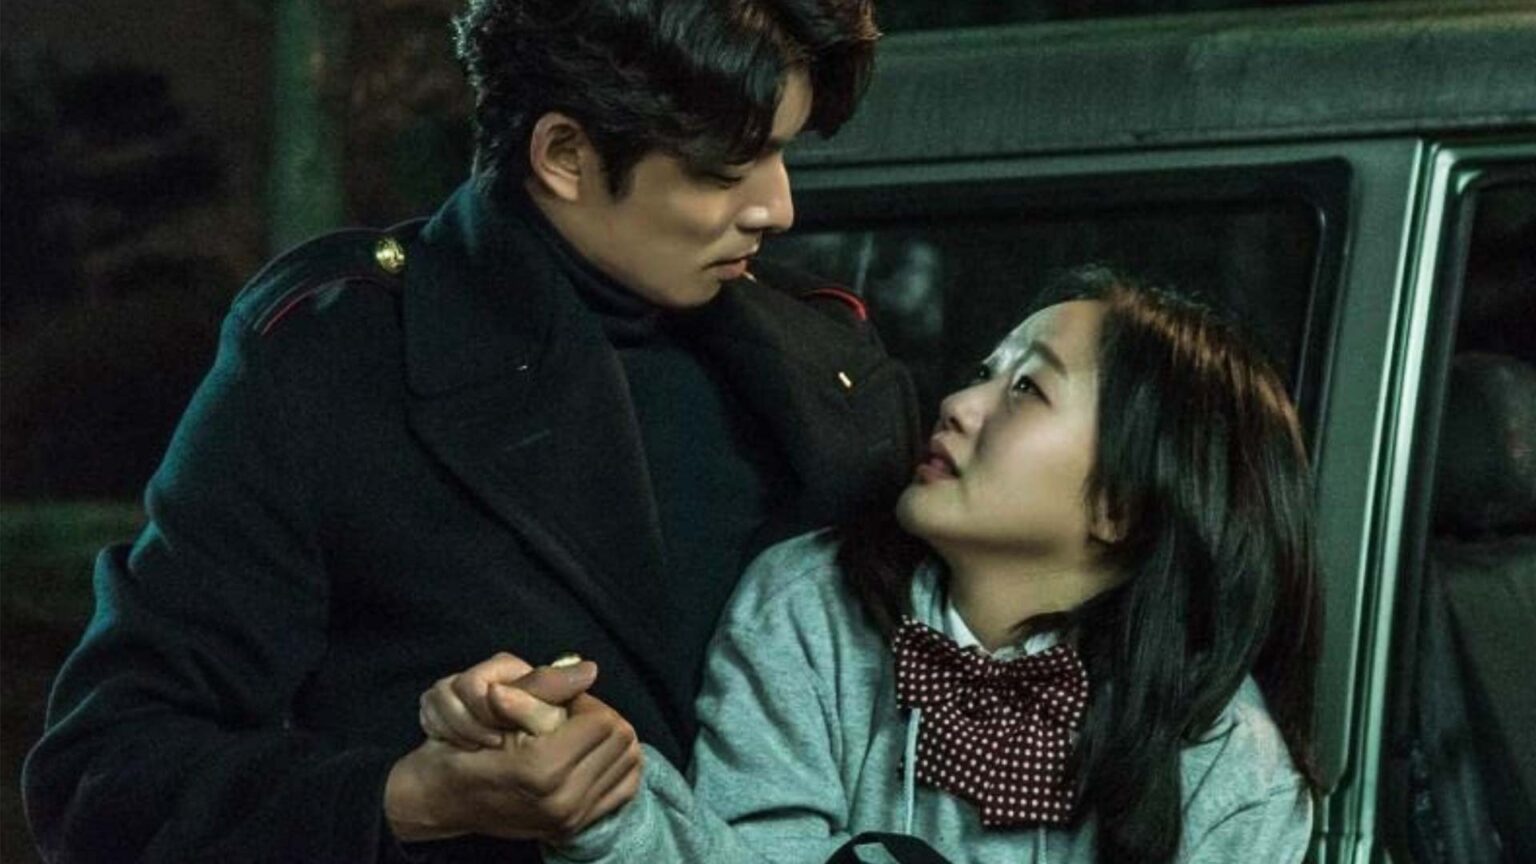 K-dramas, as they are popularly known, are often dramatic or comedic romances that focus on a single couple. Here are the most steamy XXX scenes.